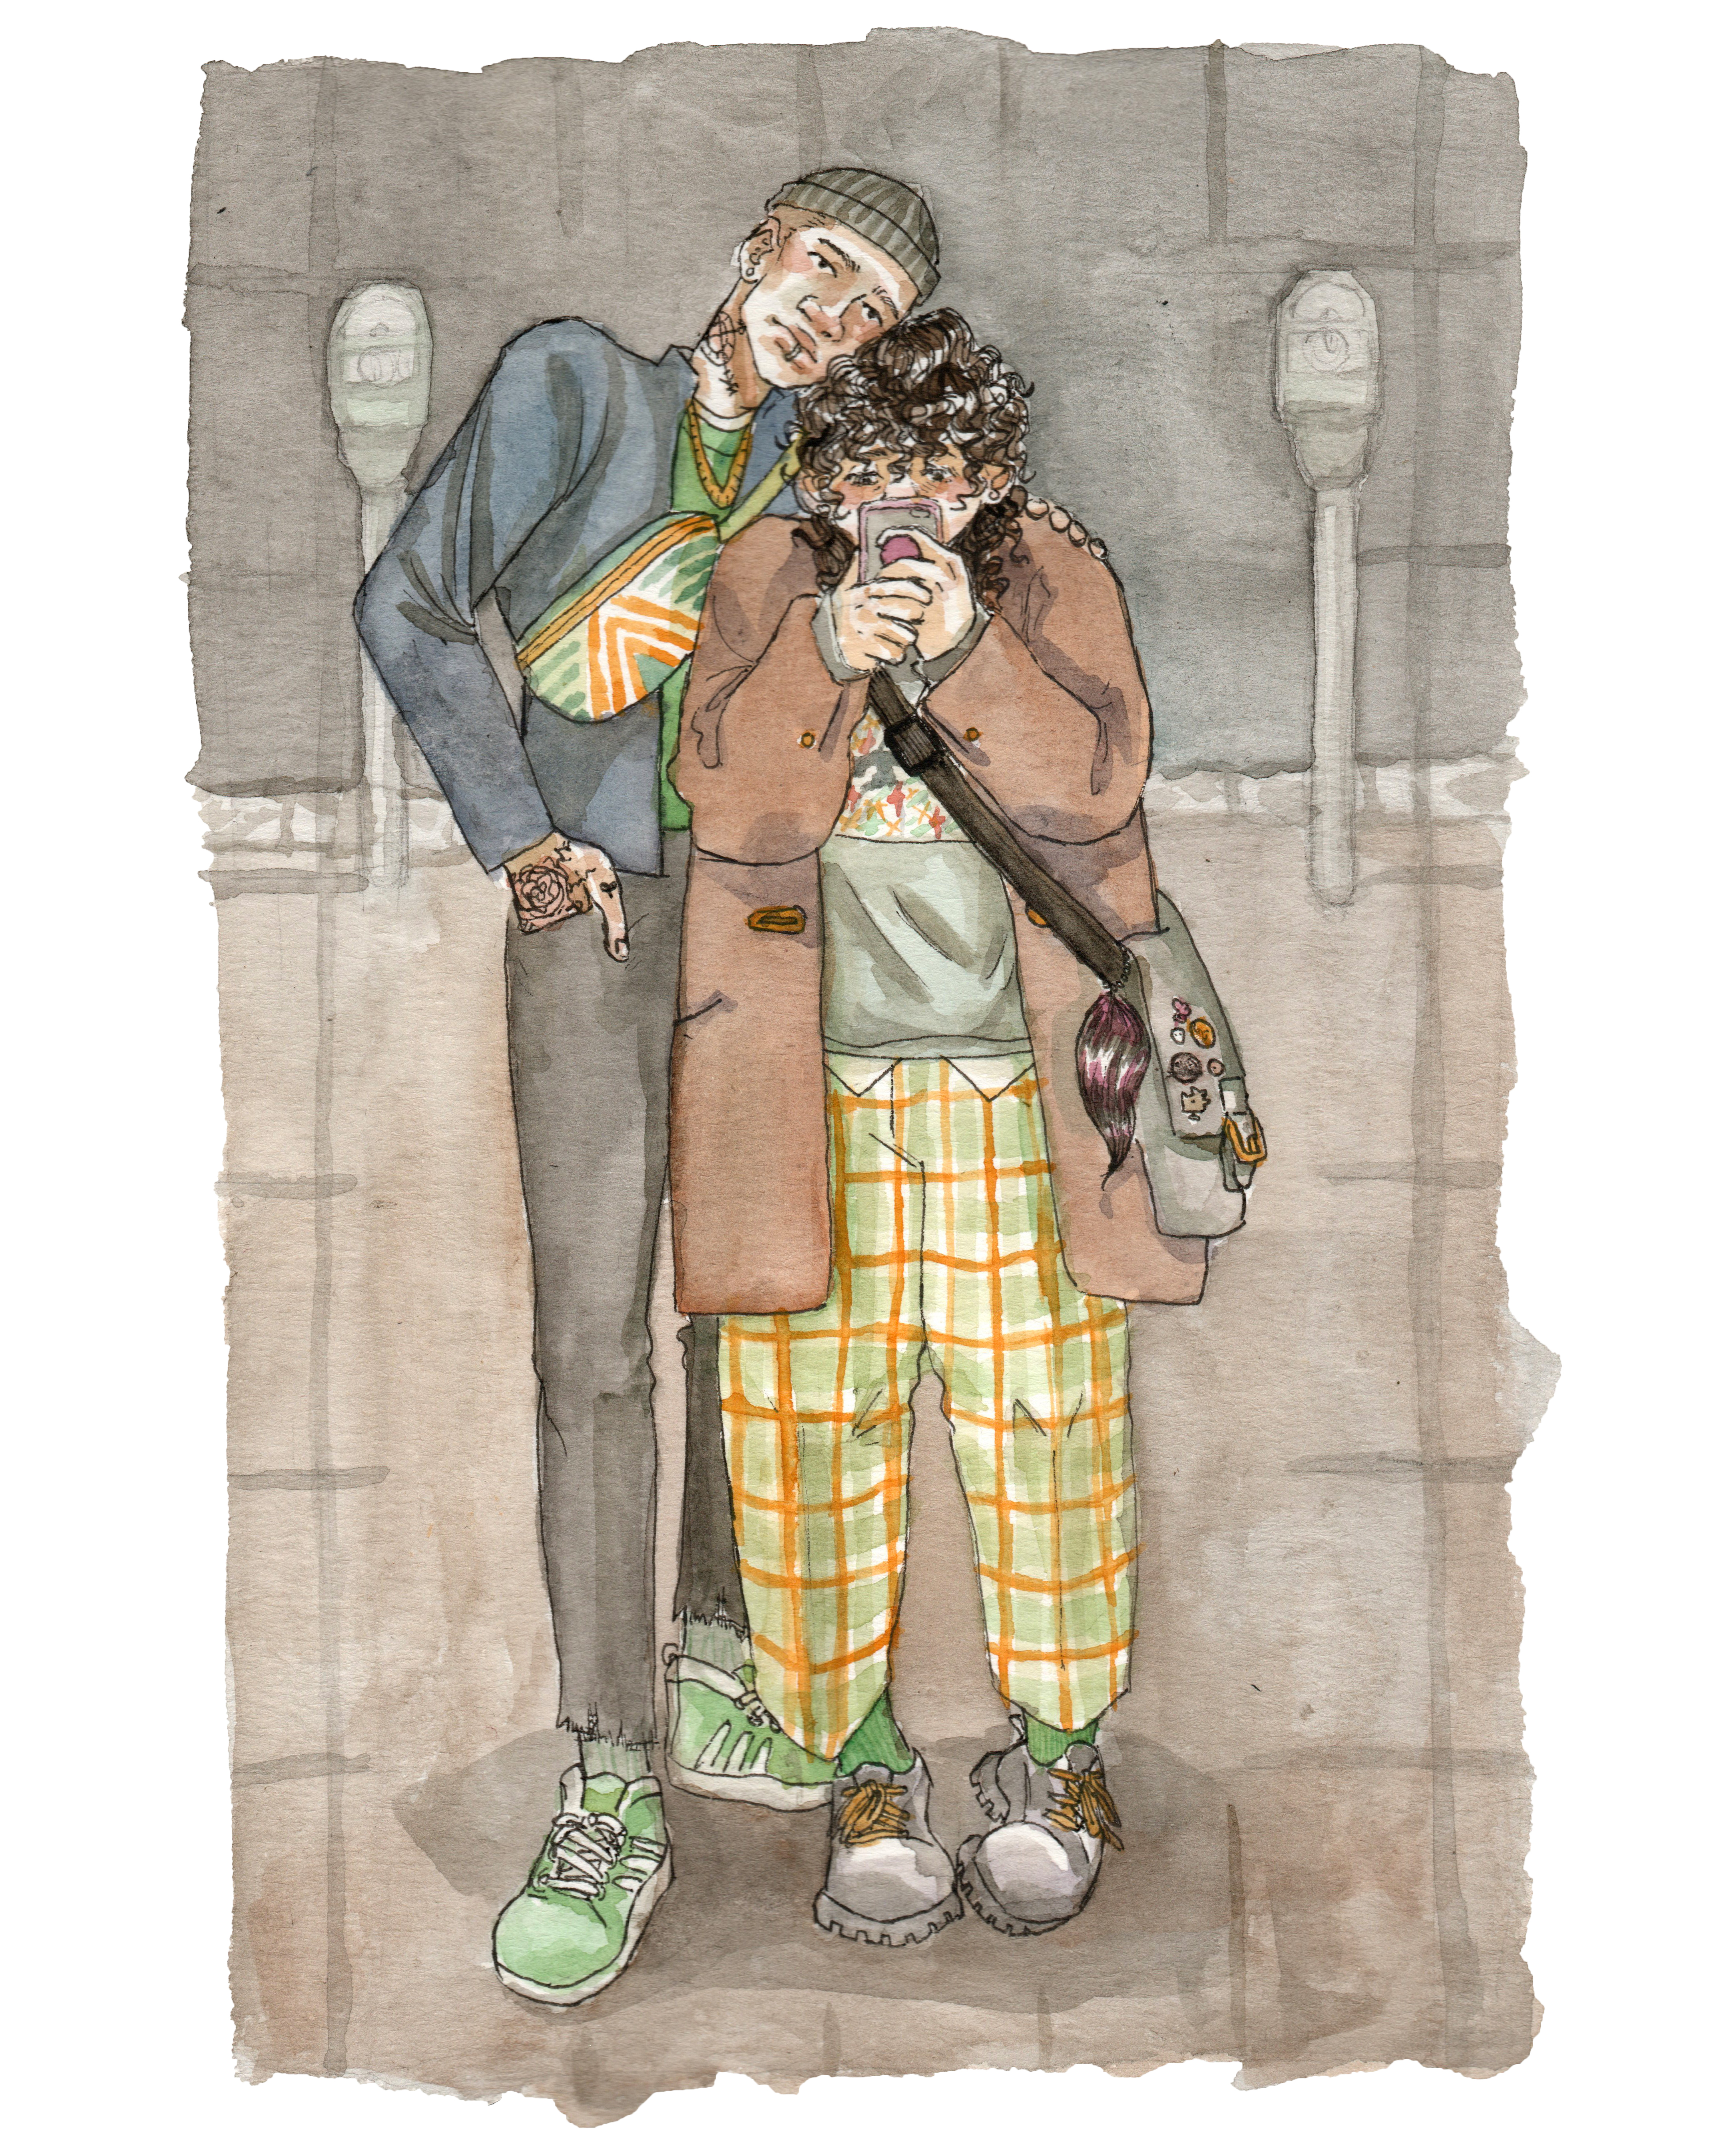 painting of teddy and miguel posing in a window. teddy holds the phone with both hands and wears a brown overcoat and green plaid pants. they have long, black, curly hair and a messenger bag with decorative pins. miguel has his arm around teddy and wears simple street clothes and a beanie with a green striped cross body bag.